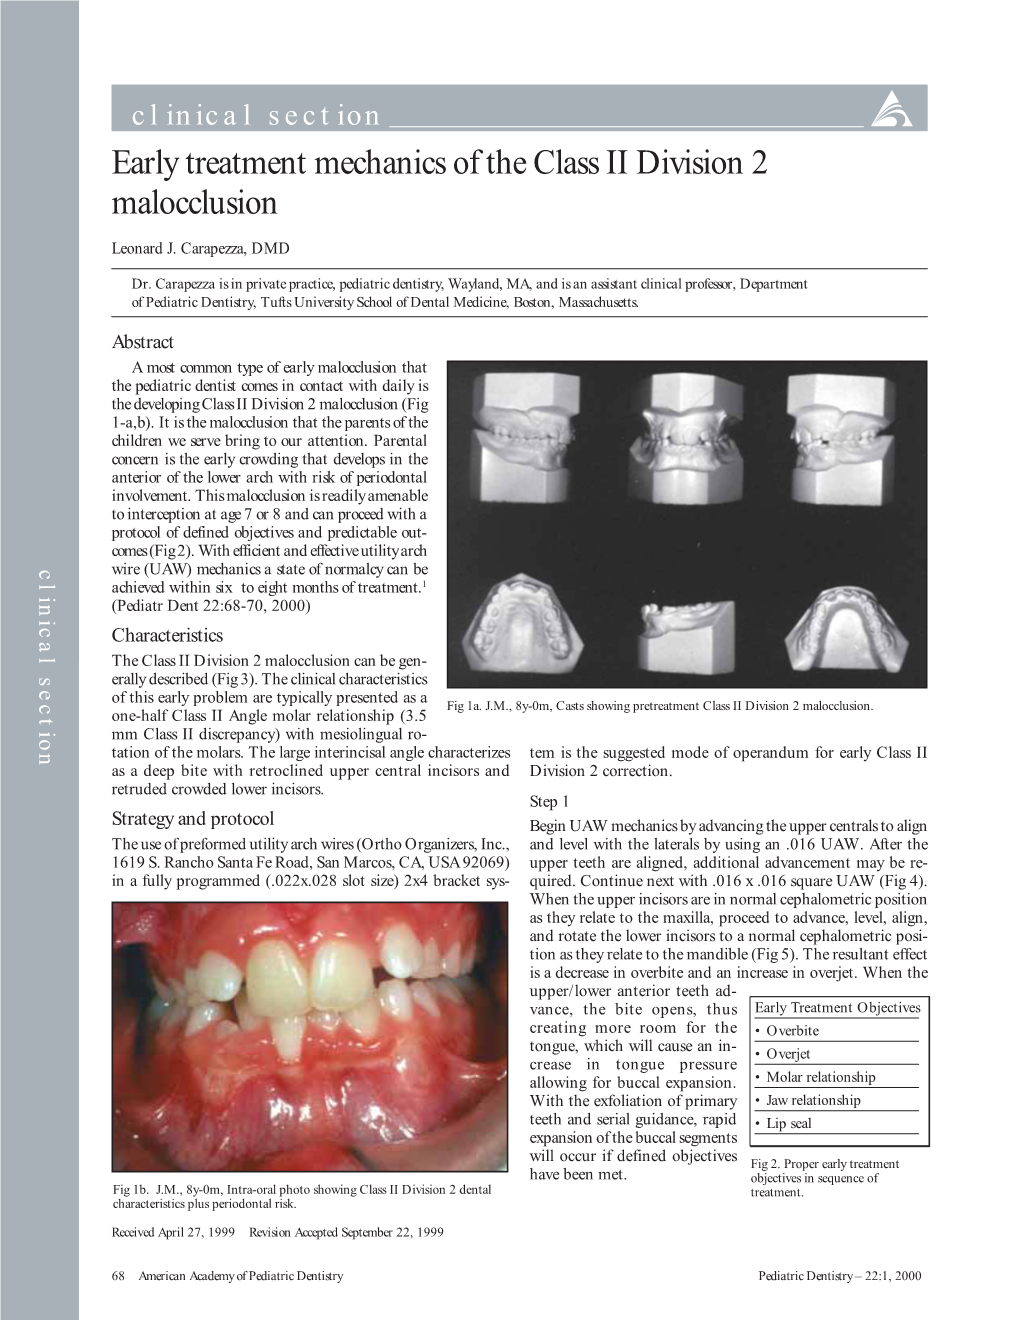 Early Treatment Mechanics of the Class II Division 2 Malocclusion